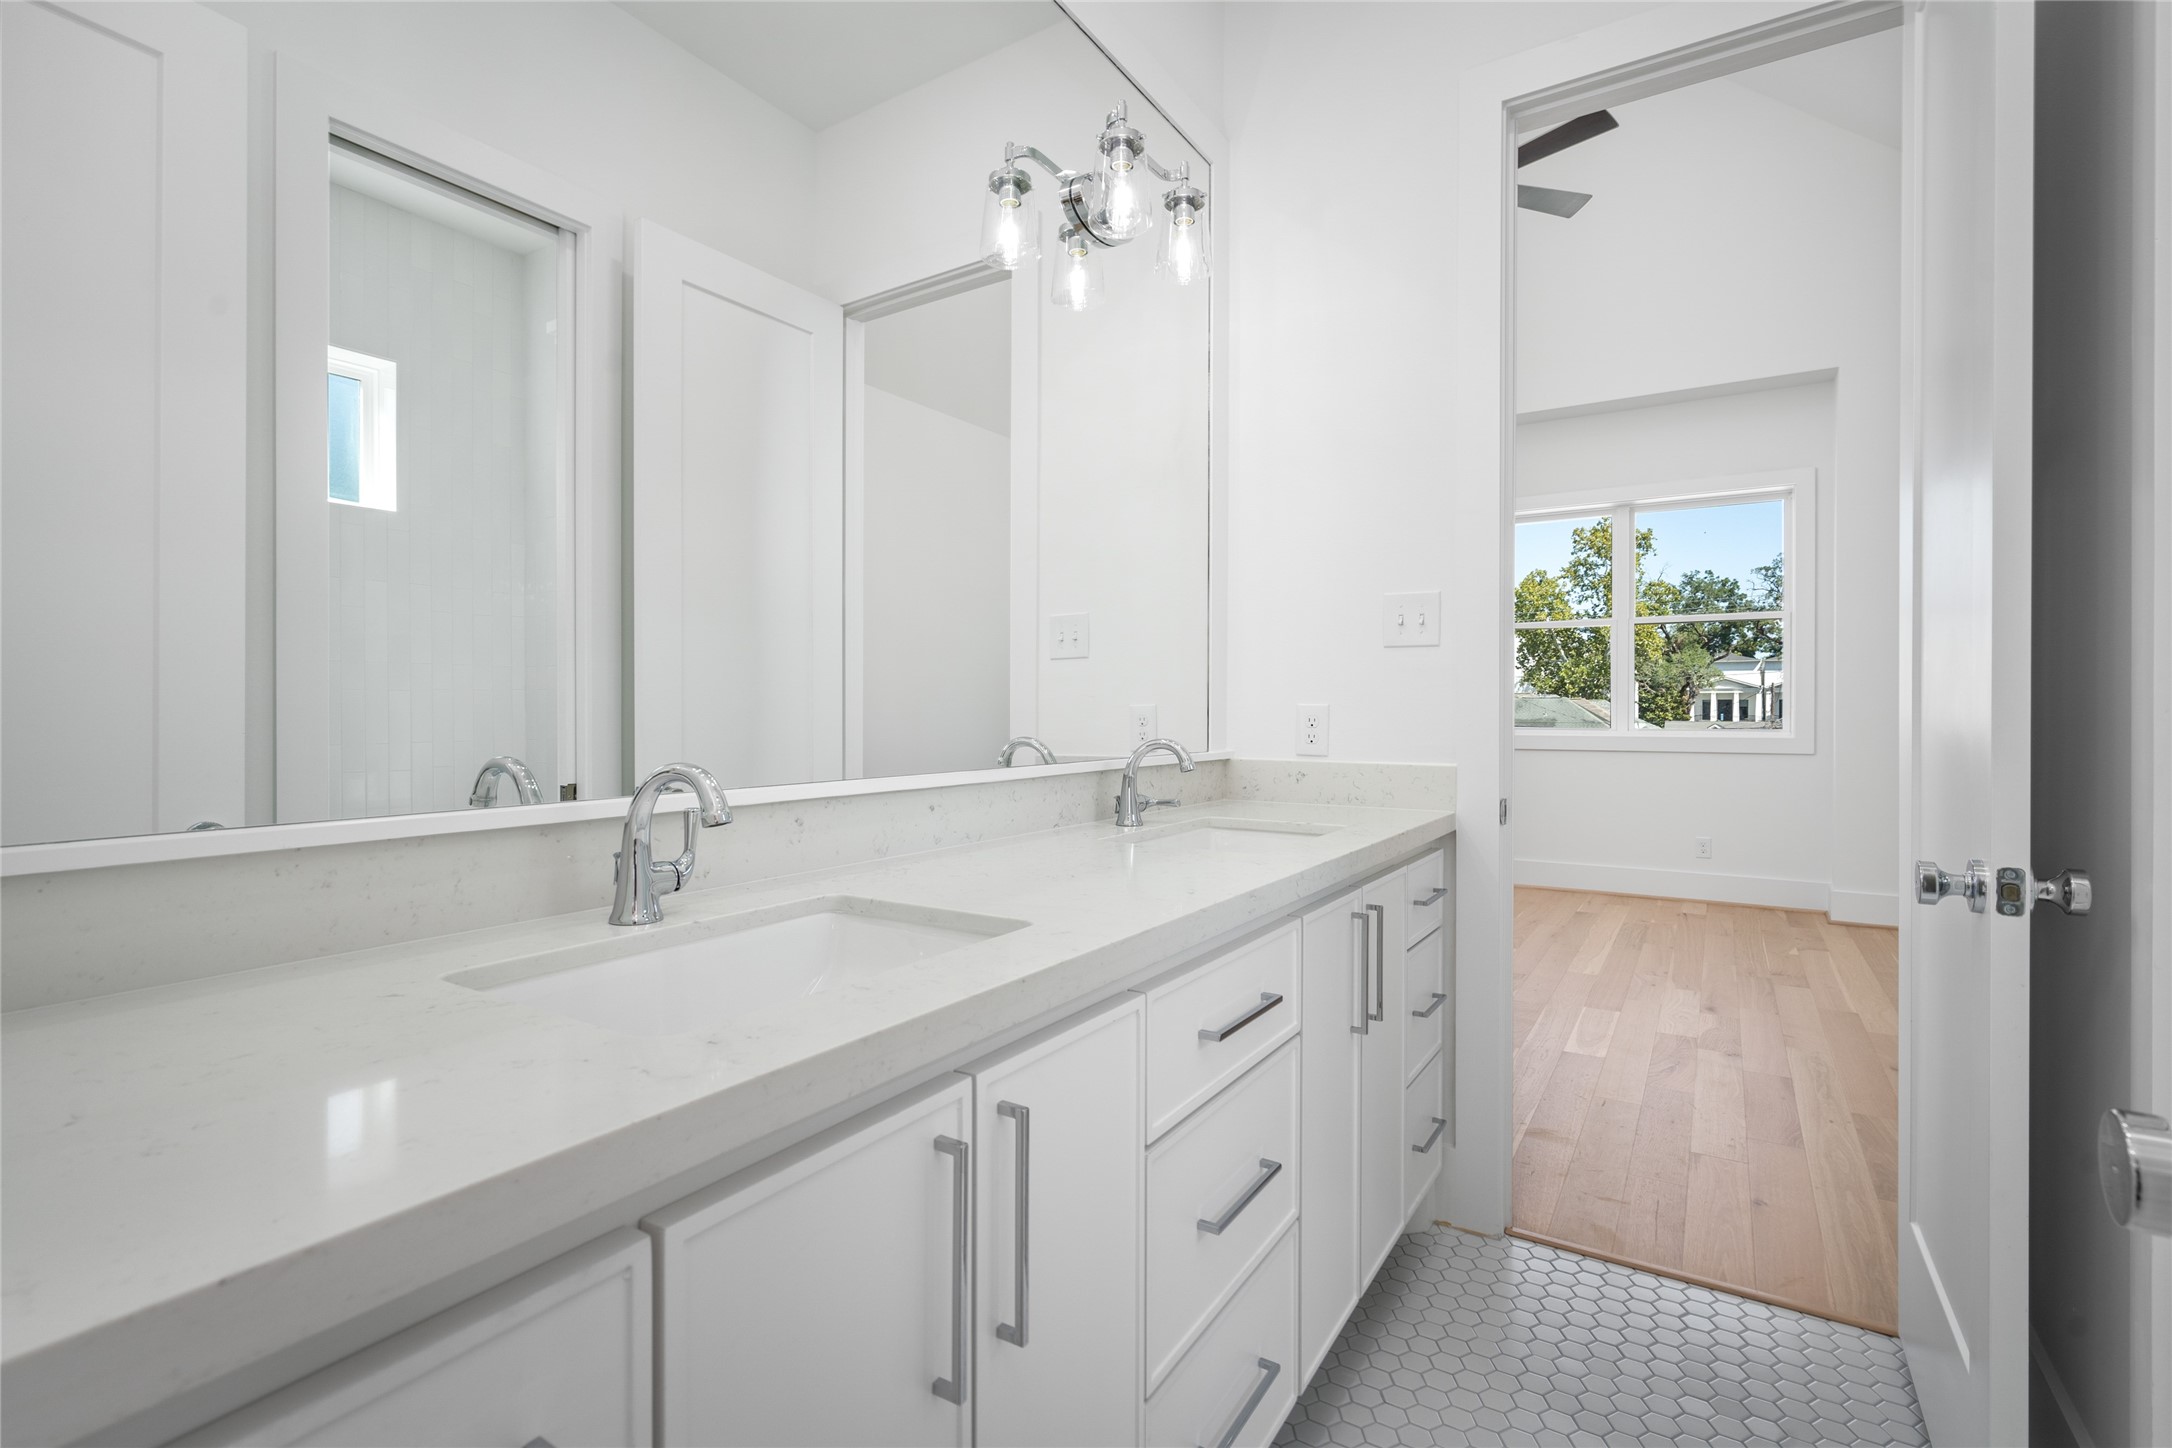 Quality is found throughout the home, including the secondary bathrooms. Custom cabinetry, quartz counters and beautiful tile flooring.